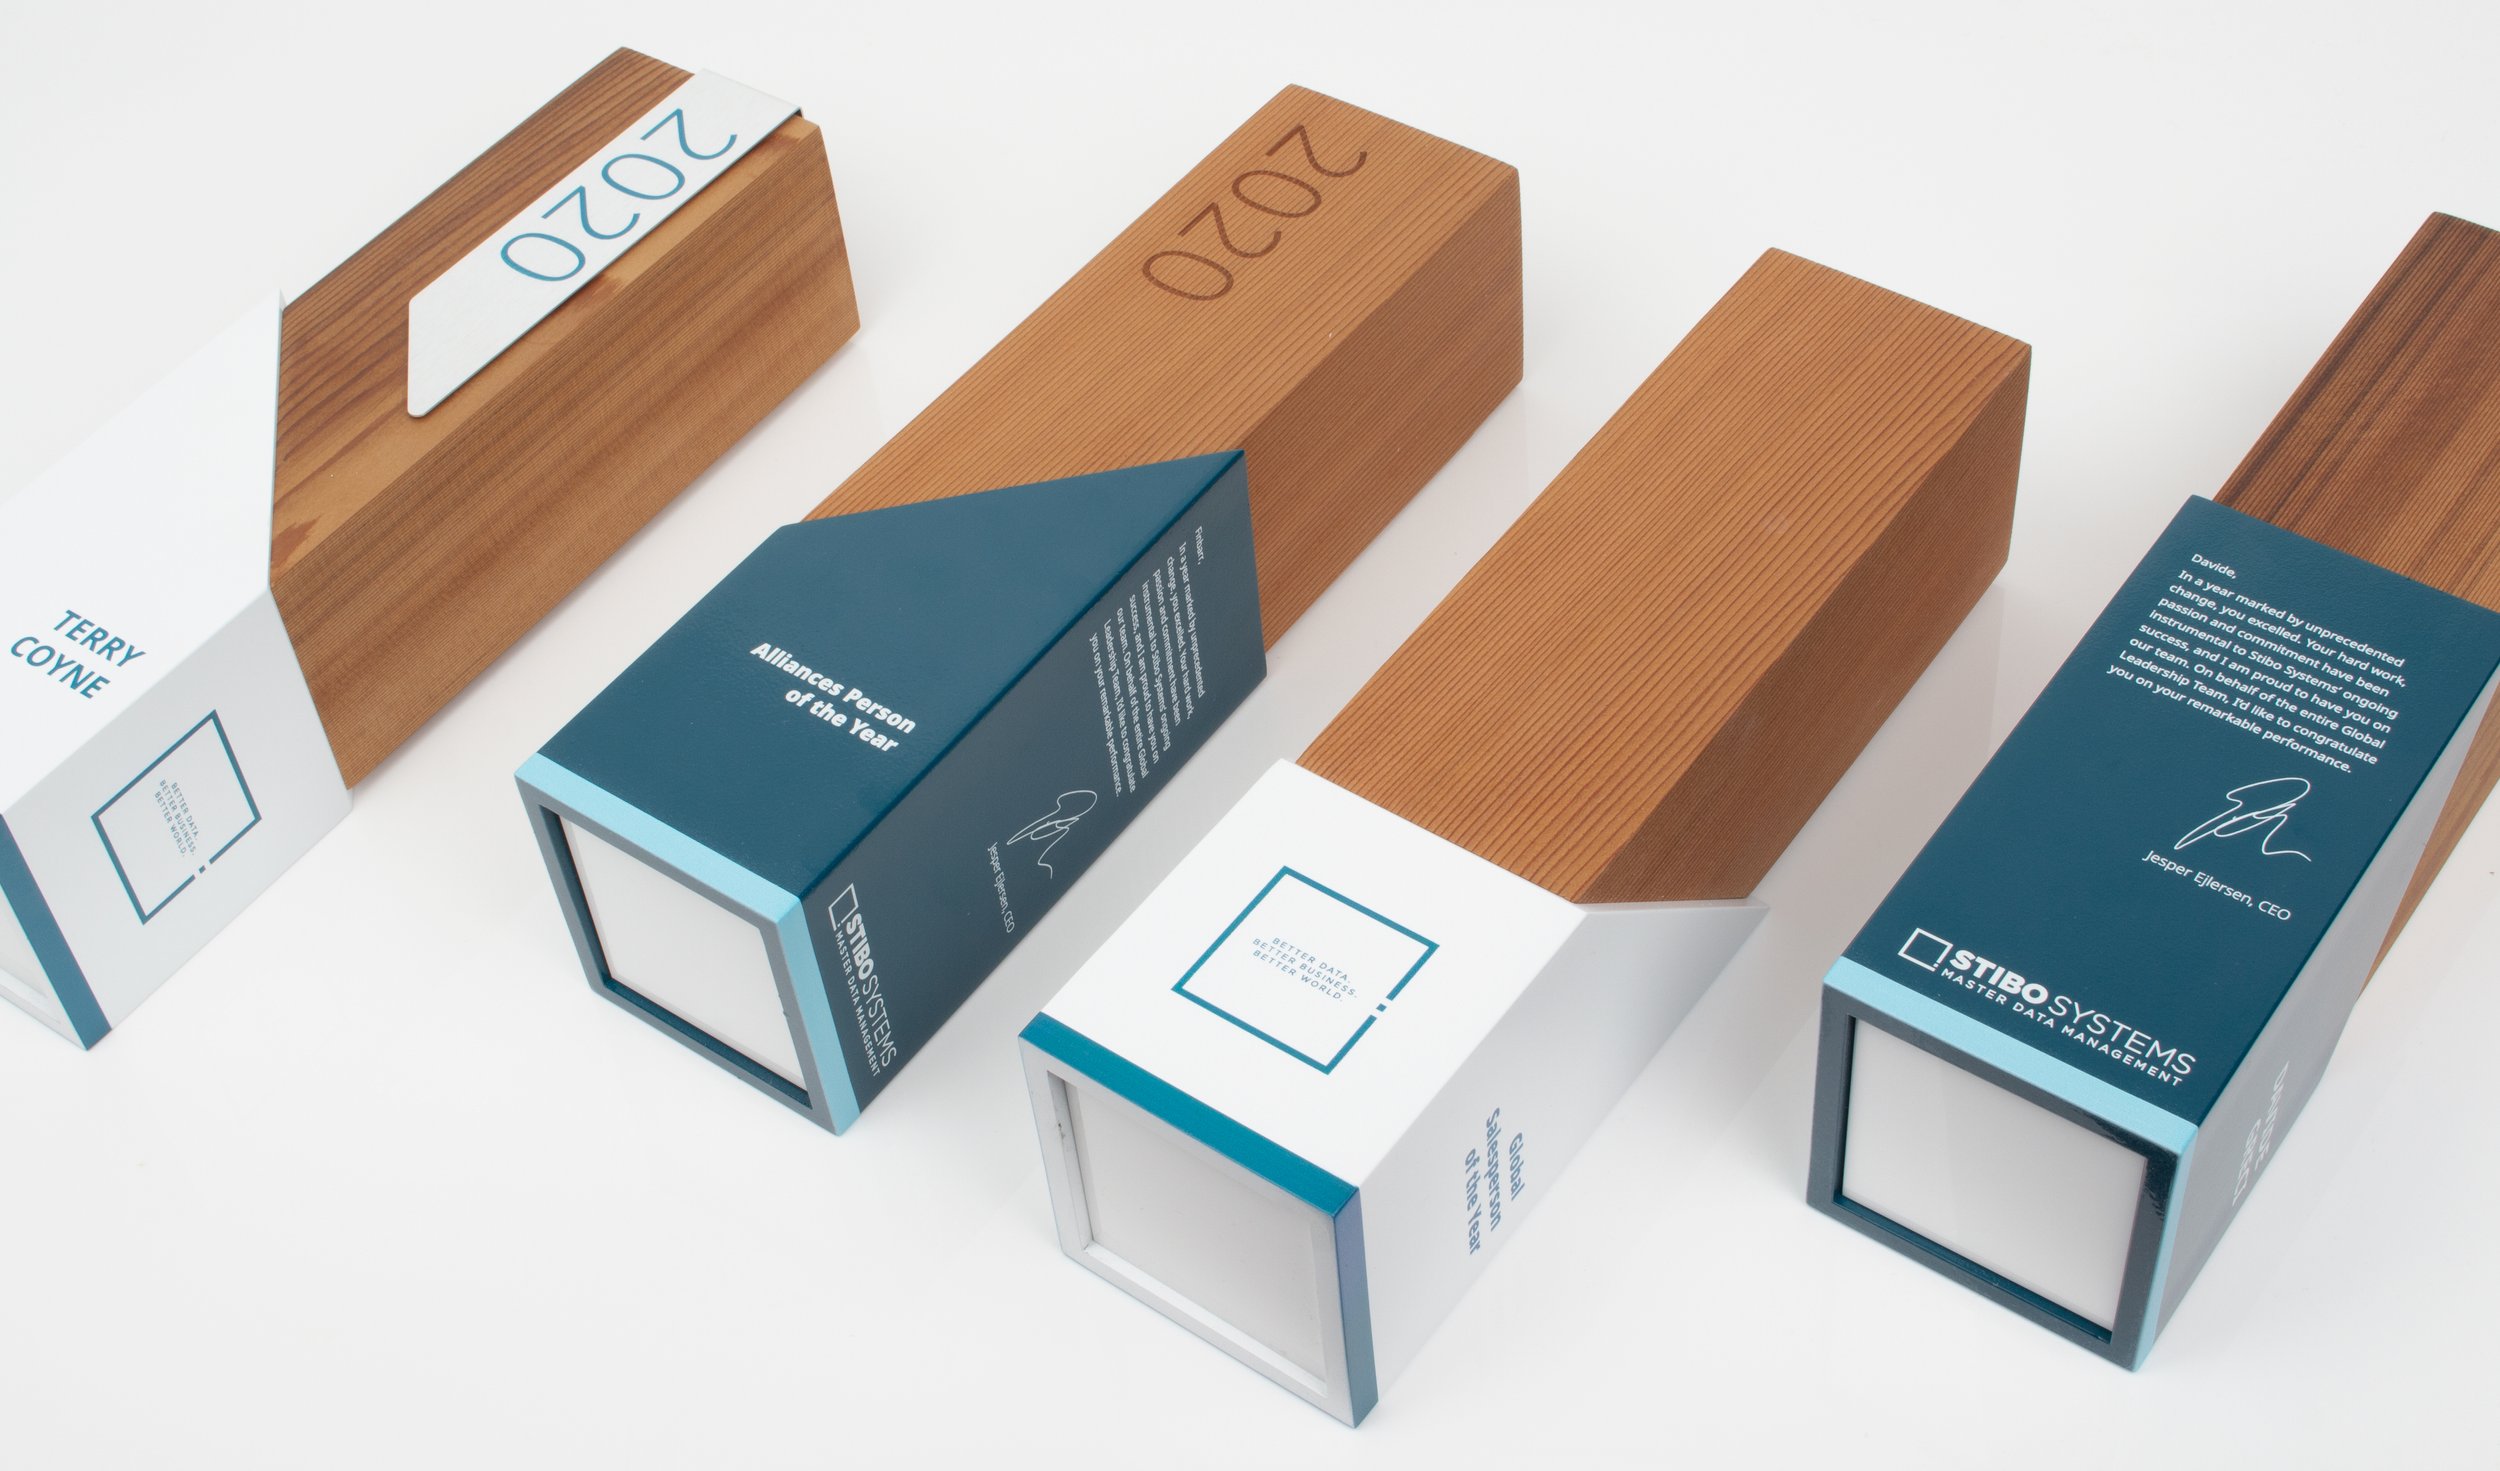 stibo systems custom wooden and metal aawards.psd